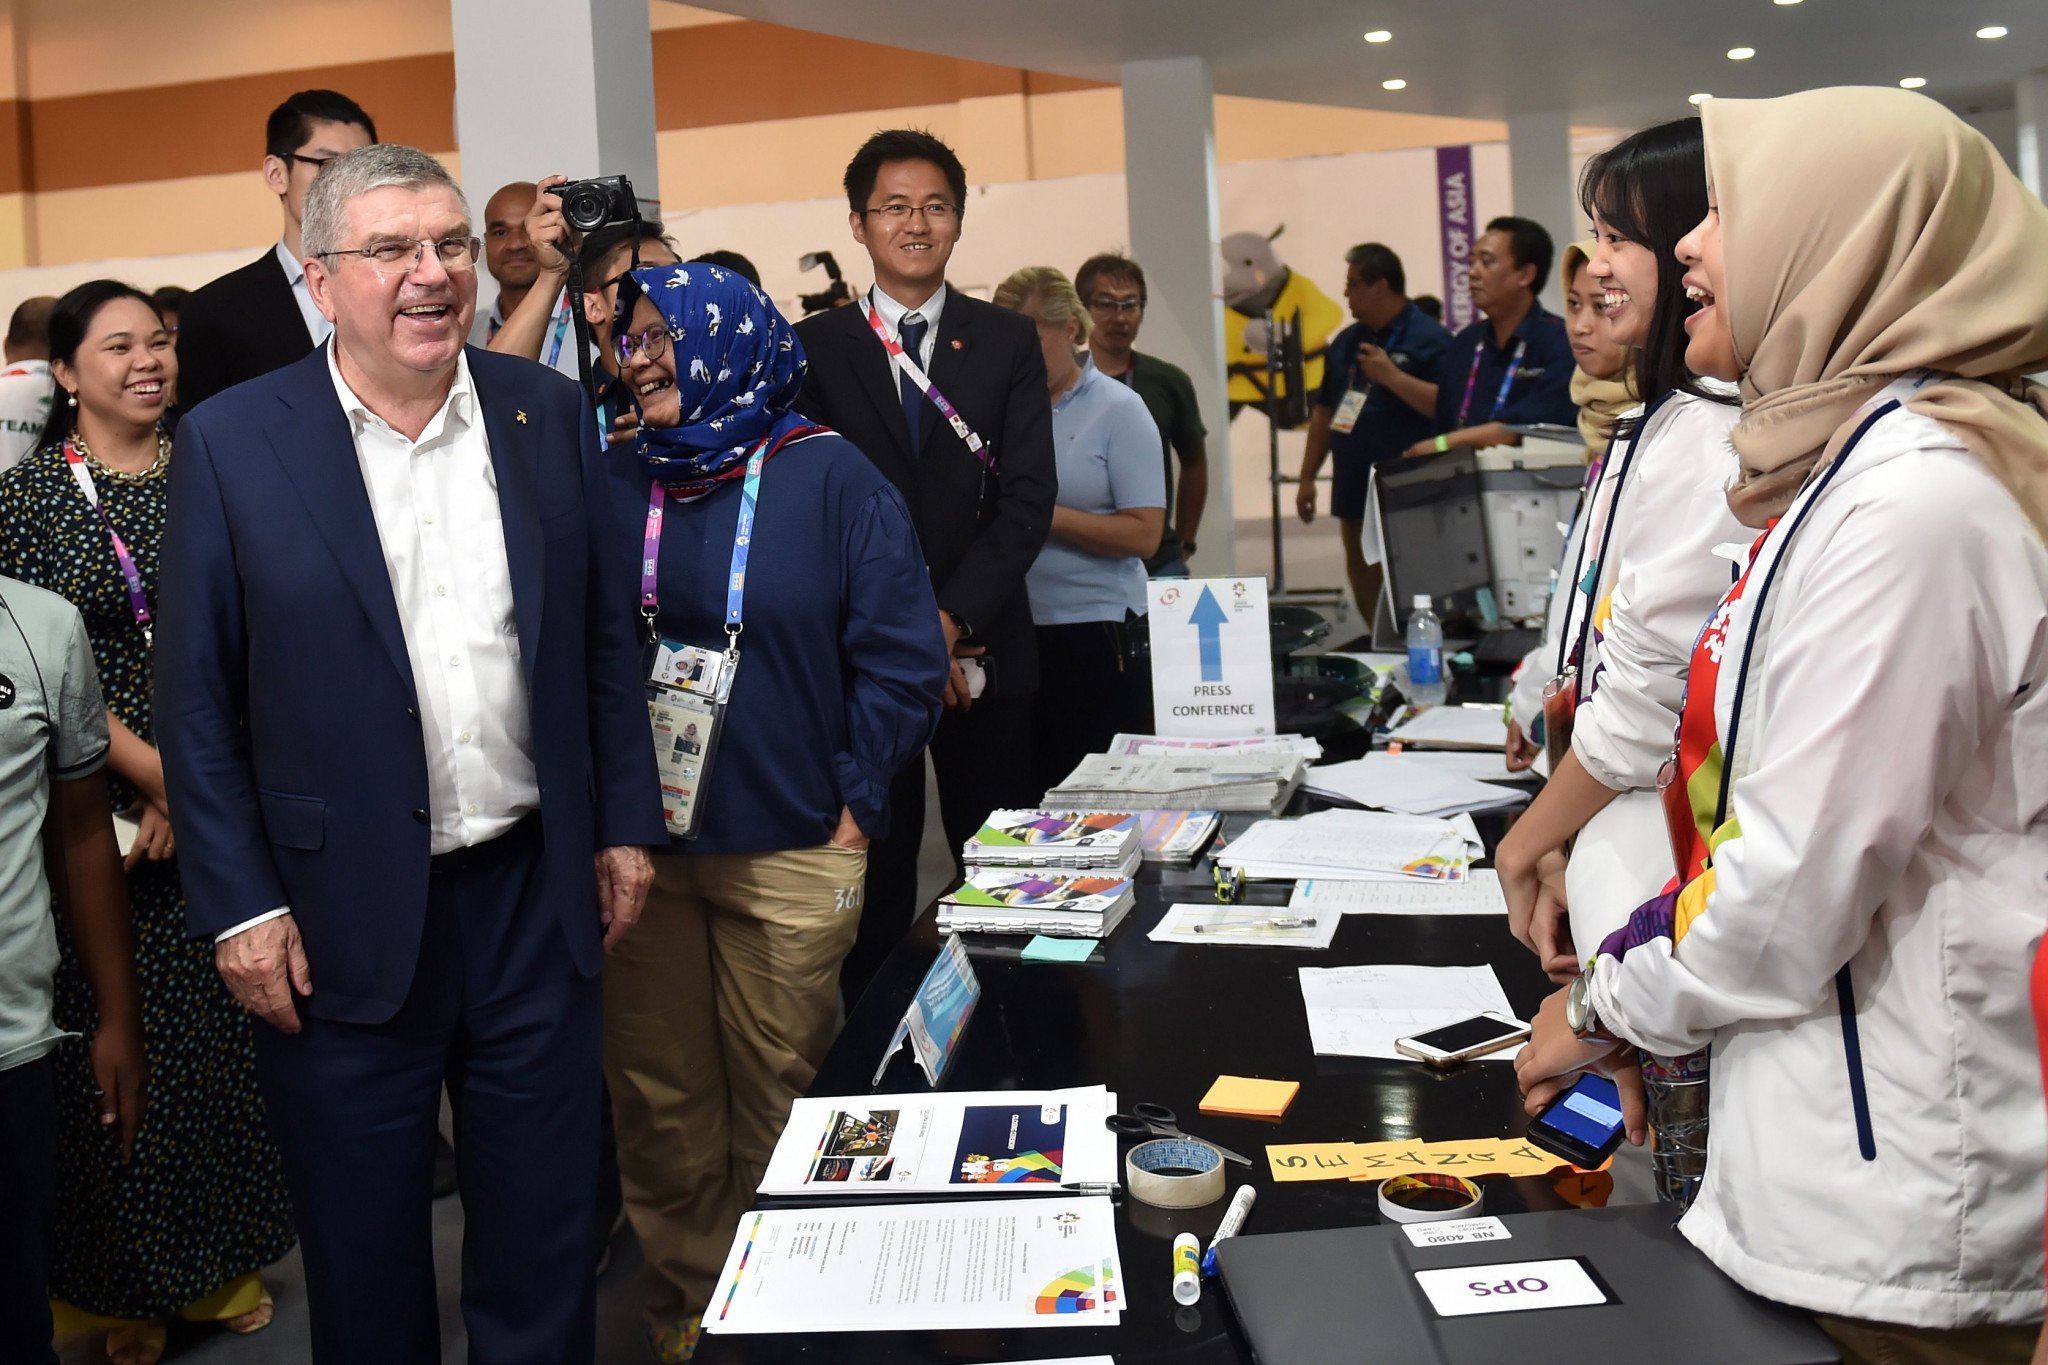 International Olympic Committee President Thomas paid a visit to the Main Press Centre before attending the Closing Ceremony ©Getty Images